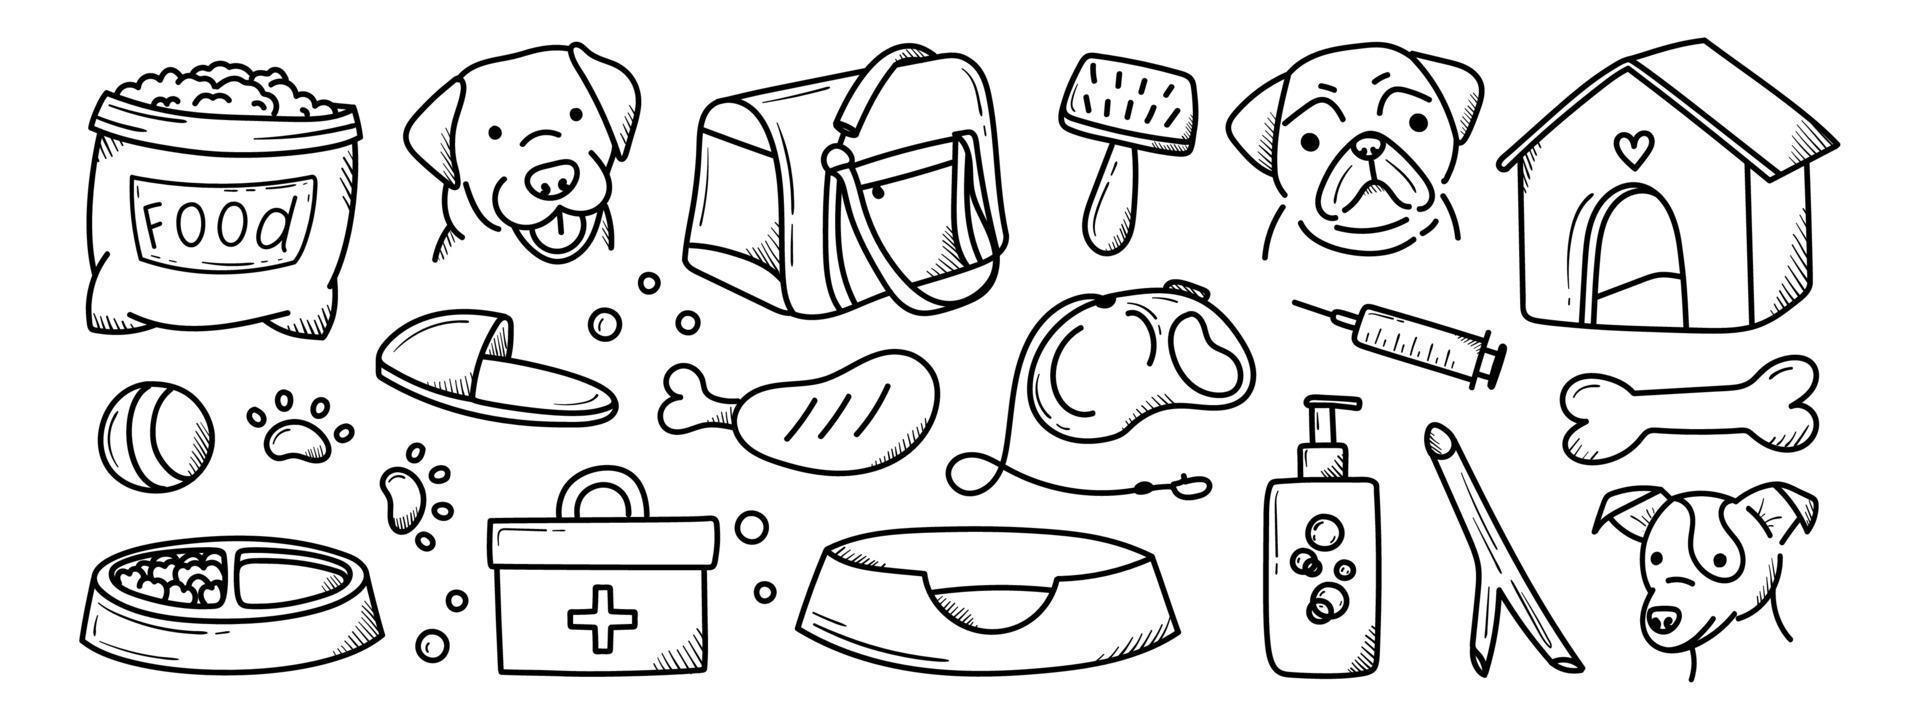 set of pets items in doodle style vector